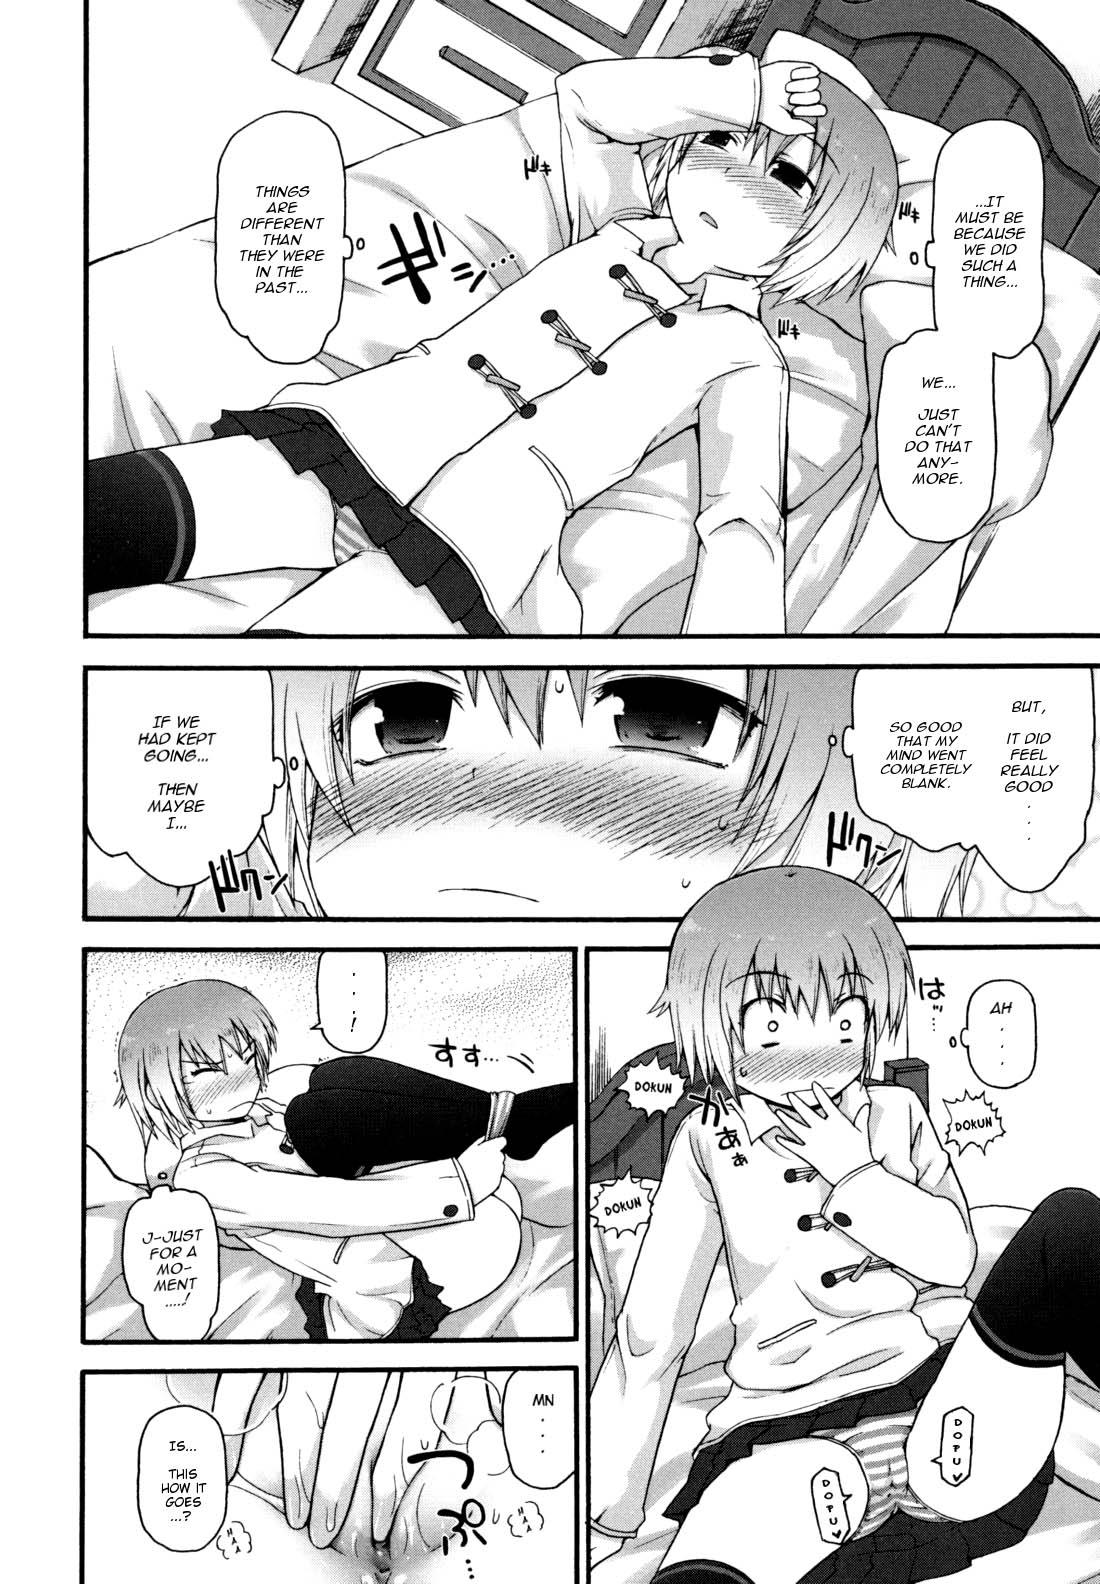 Jerk Off Onii-chan, I... Concha - Page 8